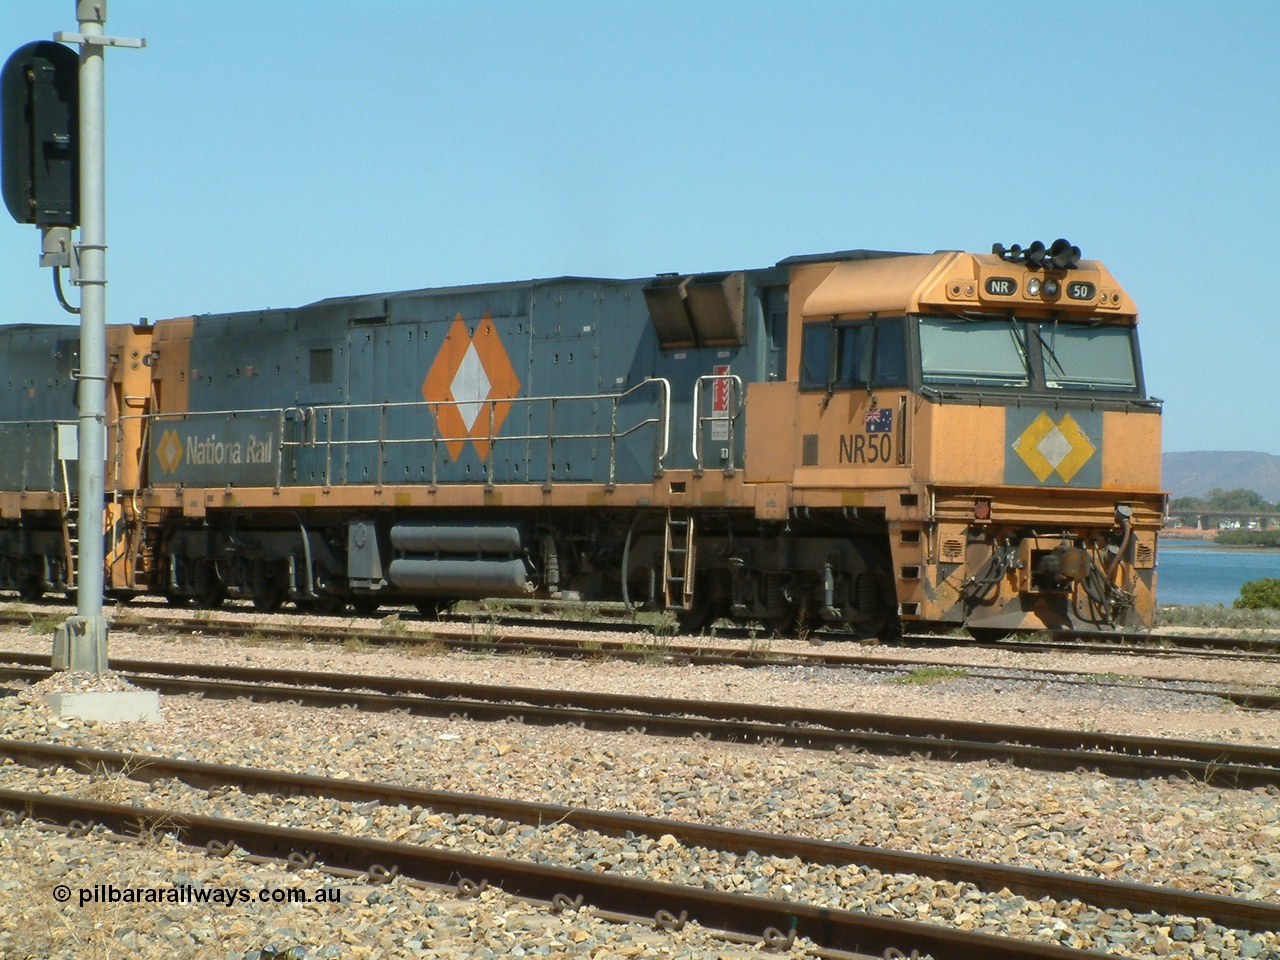 030404 125126
Port Augusta Spencer Junction yard, a Perth bound intermodal awaits departure time on 13 Road behind National Rail NR class units built by Goninan as GE Cv40-9i models, NR 50 serial 7250-08 / 97-252. 4th April 2003.
Keywords: NR-class;NR50;7250-08/97-252;Goninan;GE;Cv40-9i;